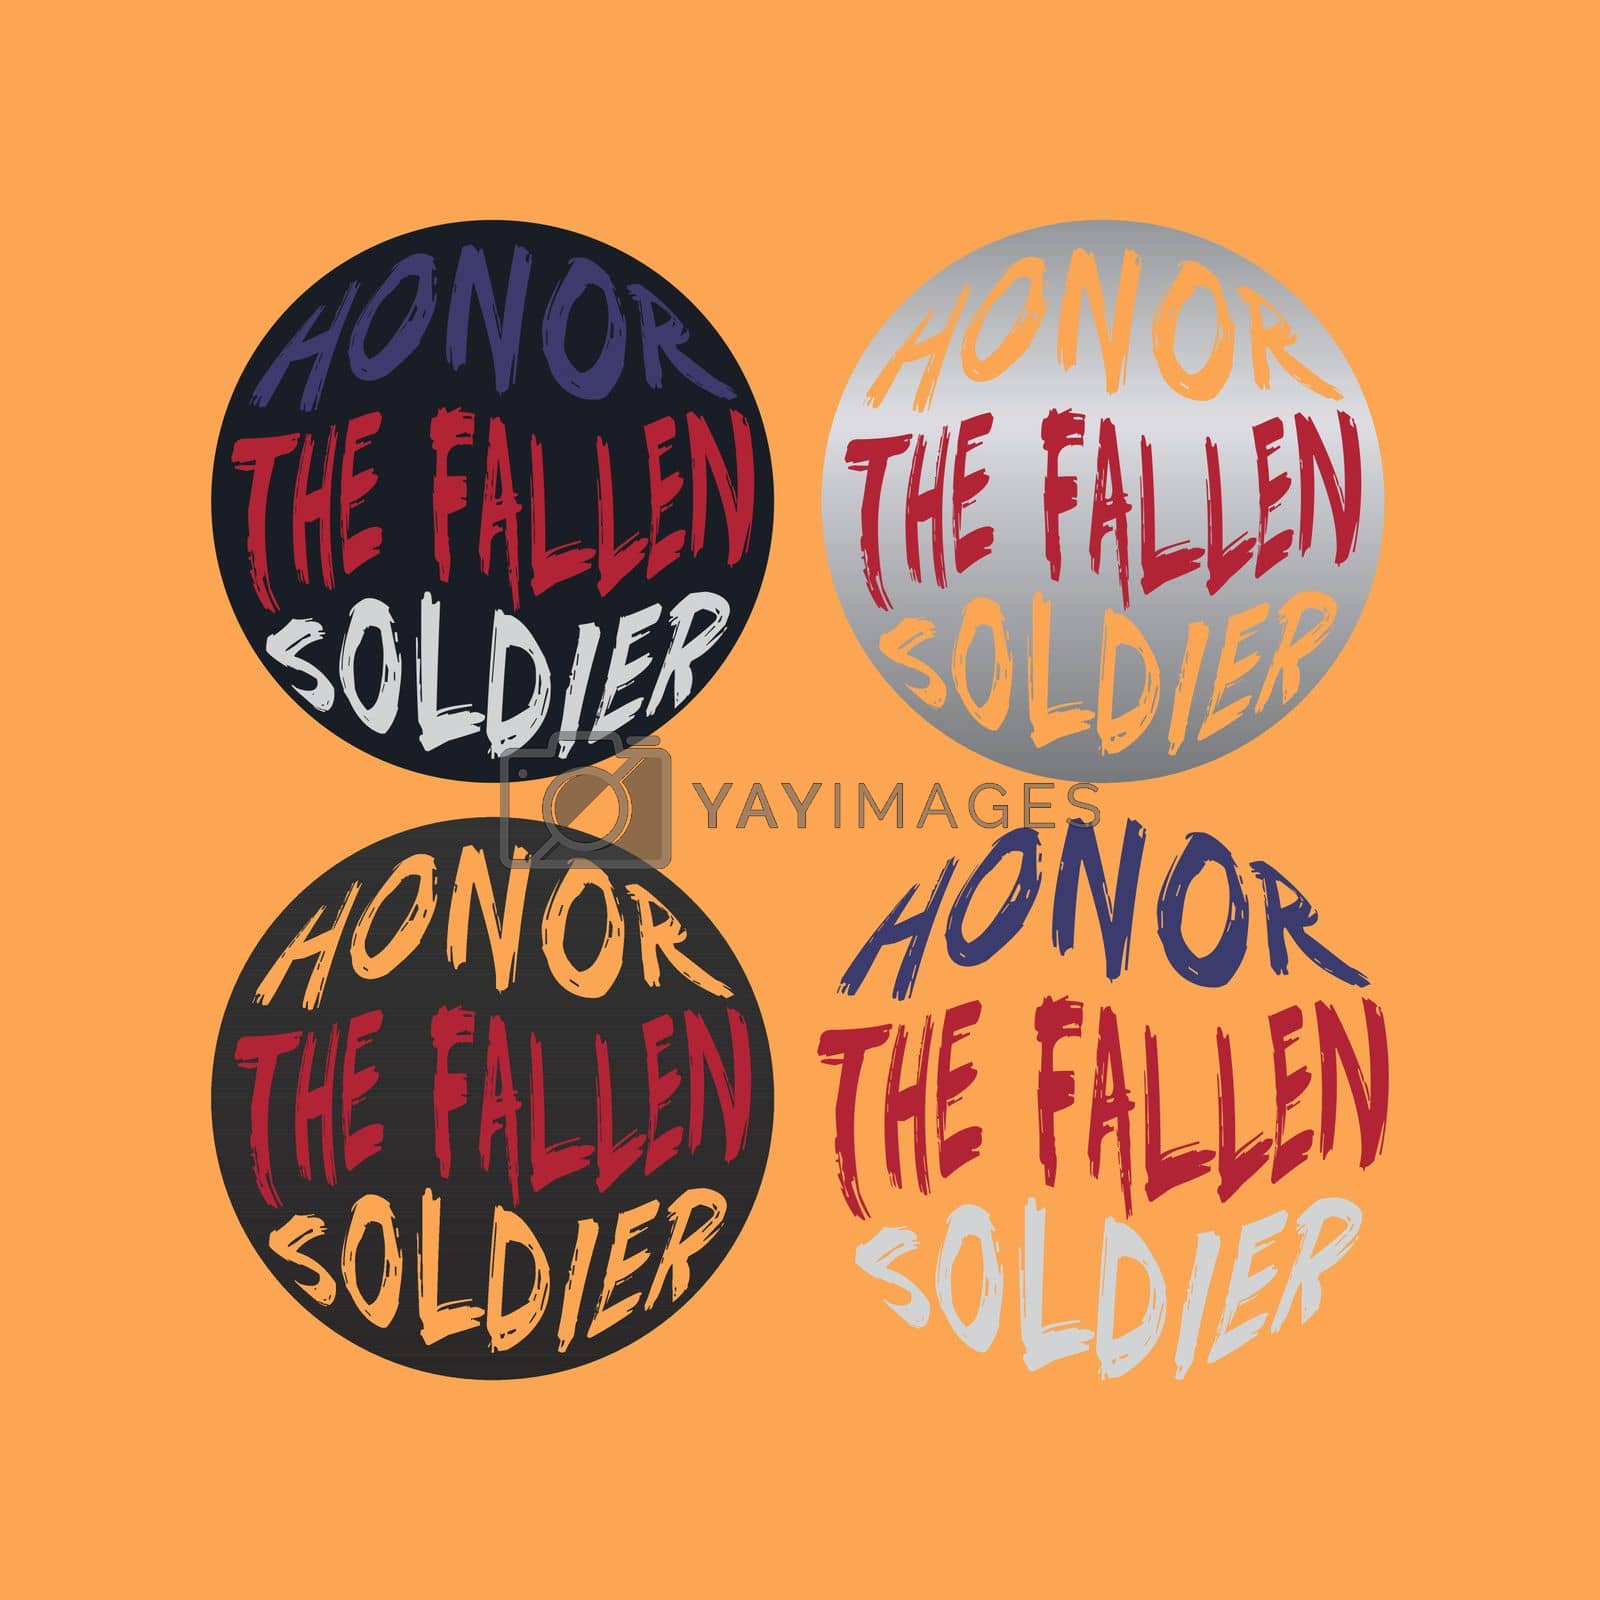 Royalty free image of HONOR THE FALLEN SOLDIER, lettering typography design artwork collection.  by Menyoen